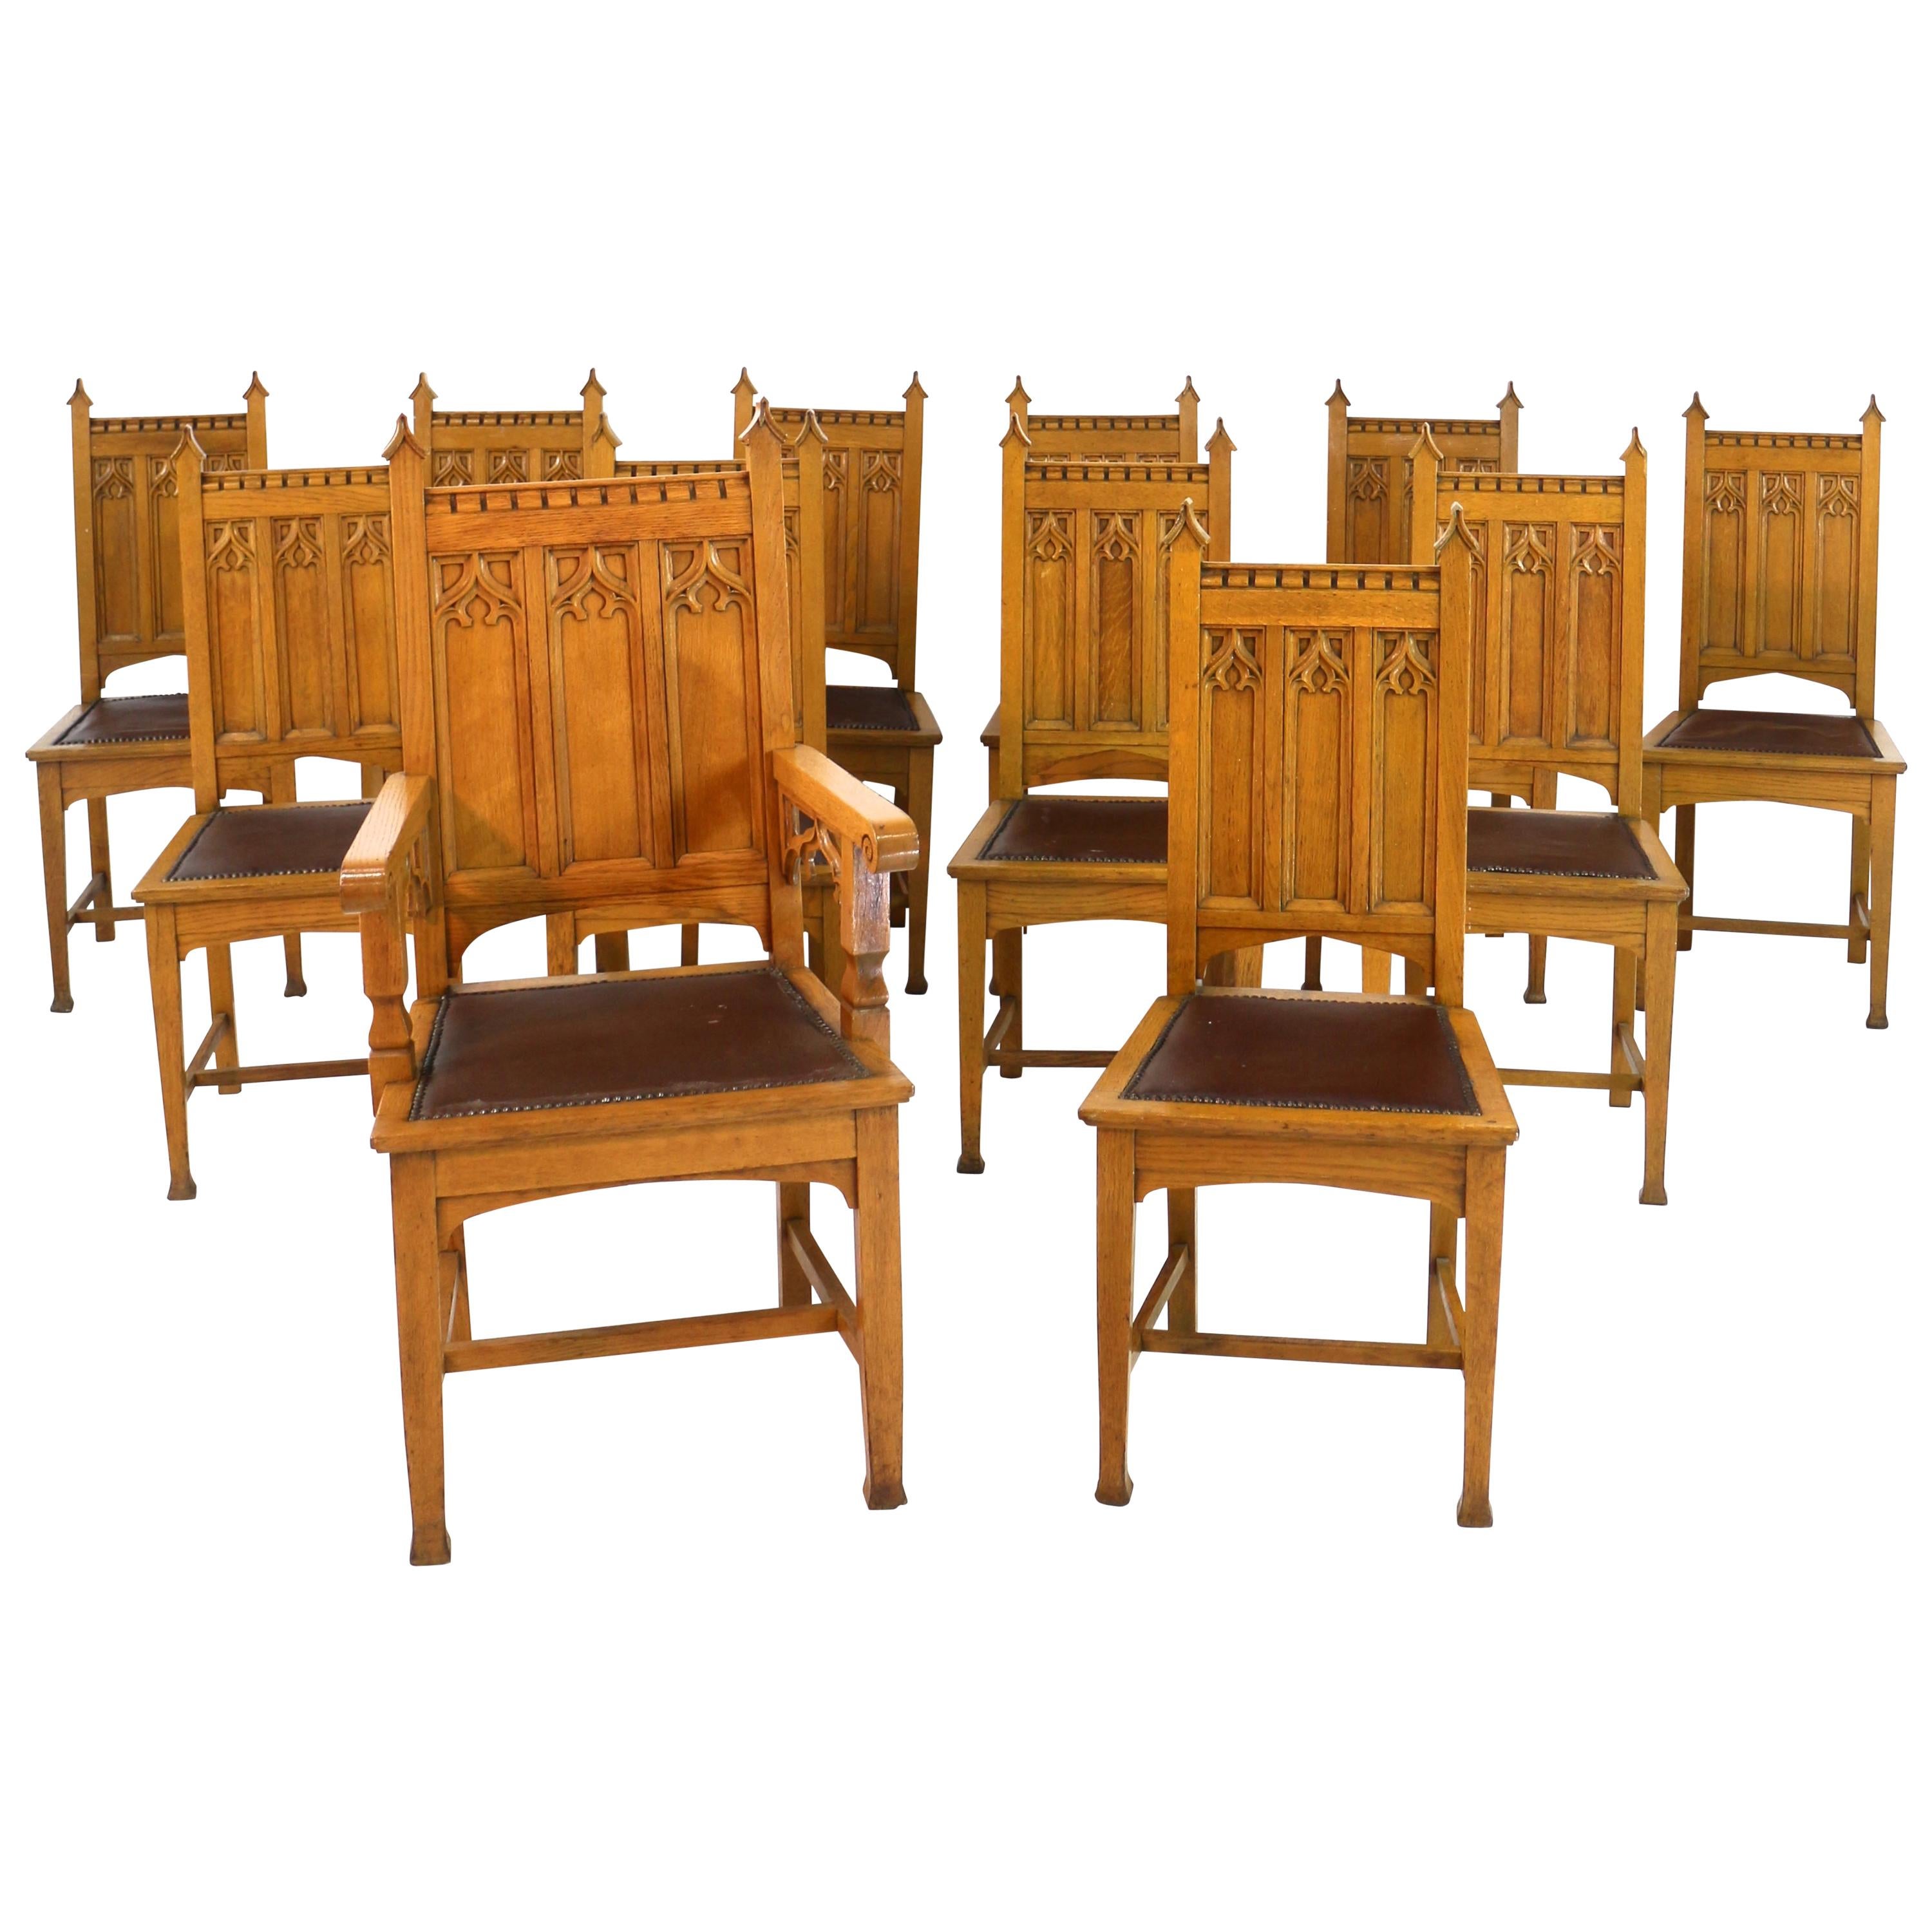 Antique English Set of 12 Gothic Revival Arts & Crafts Oak Dining Chairs